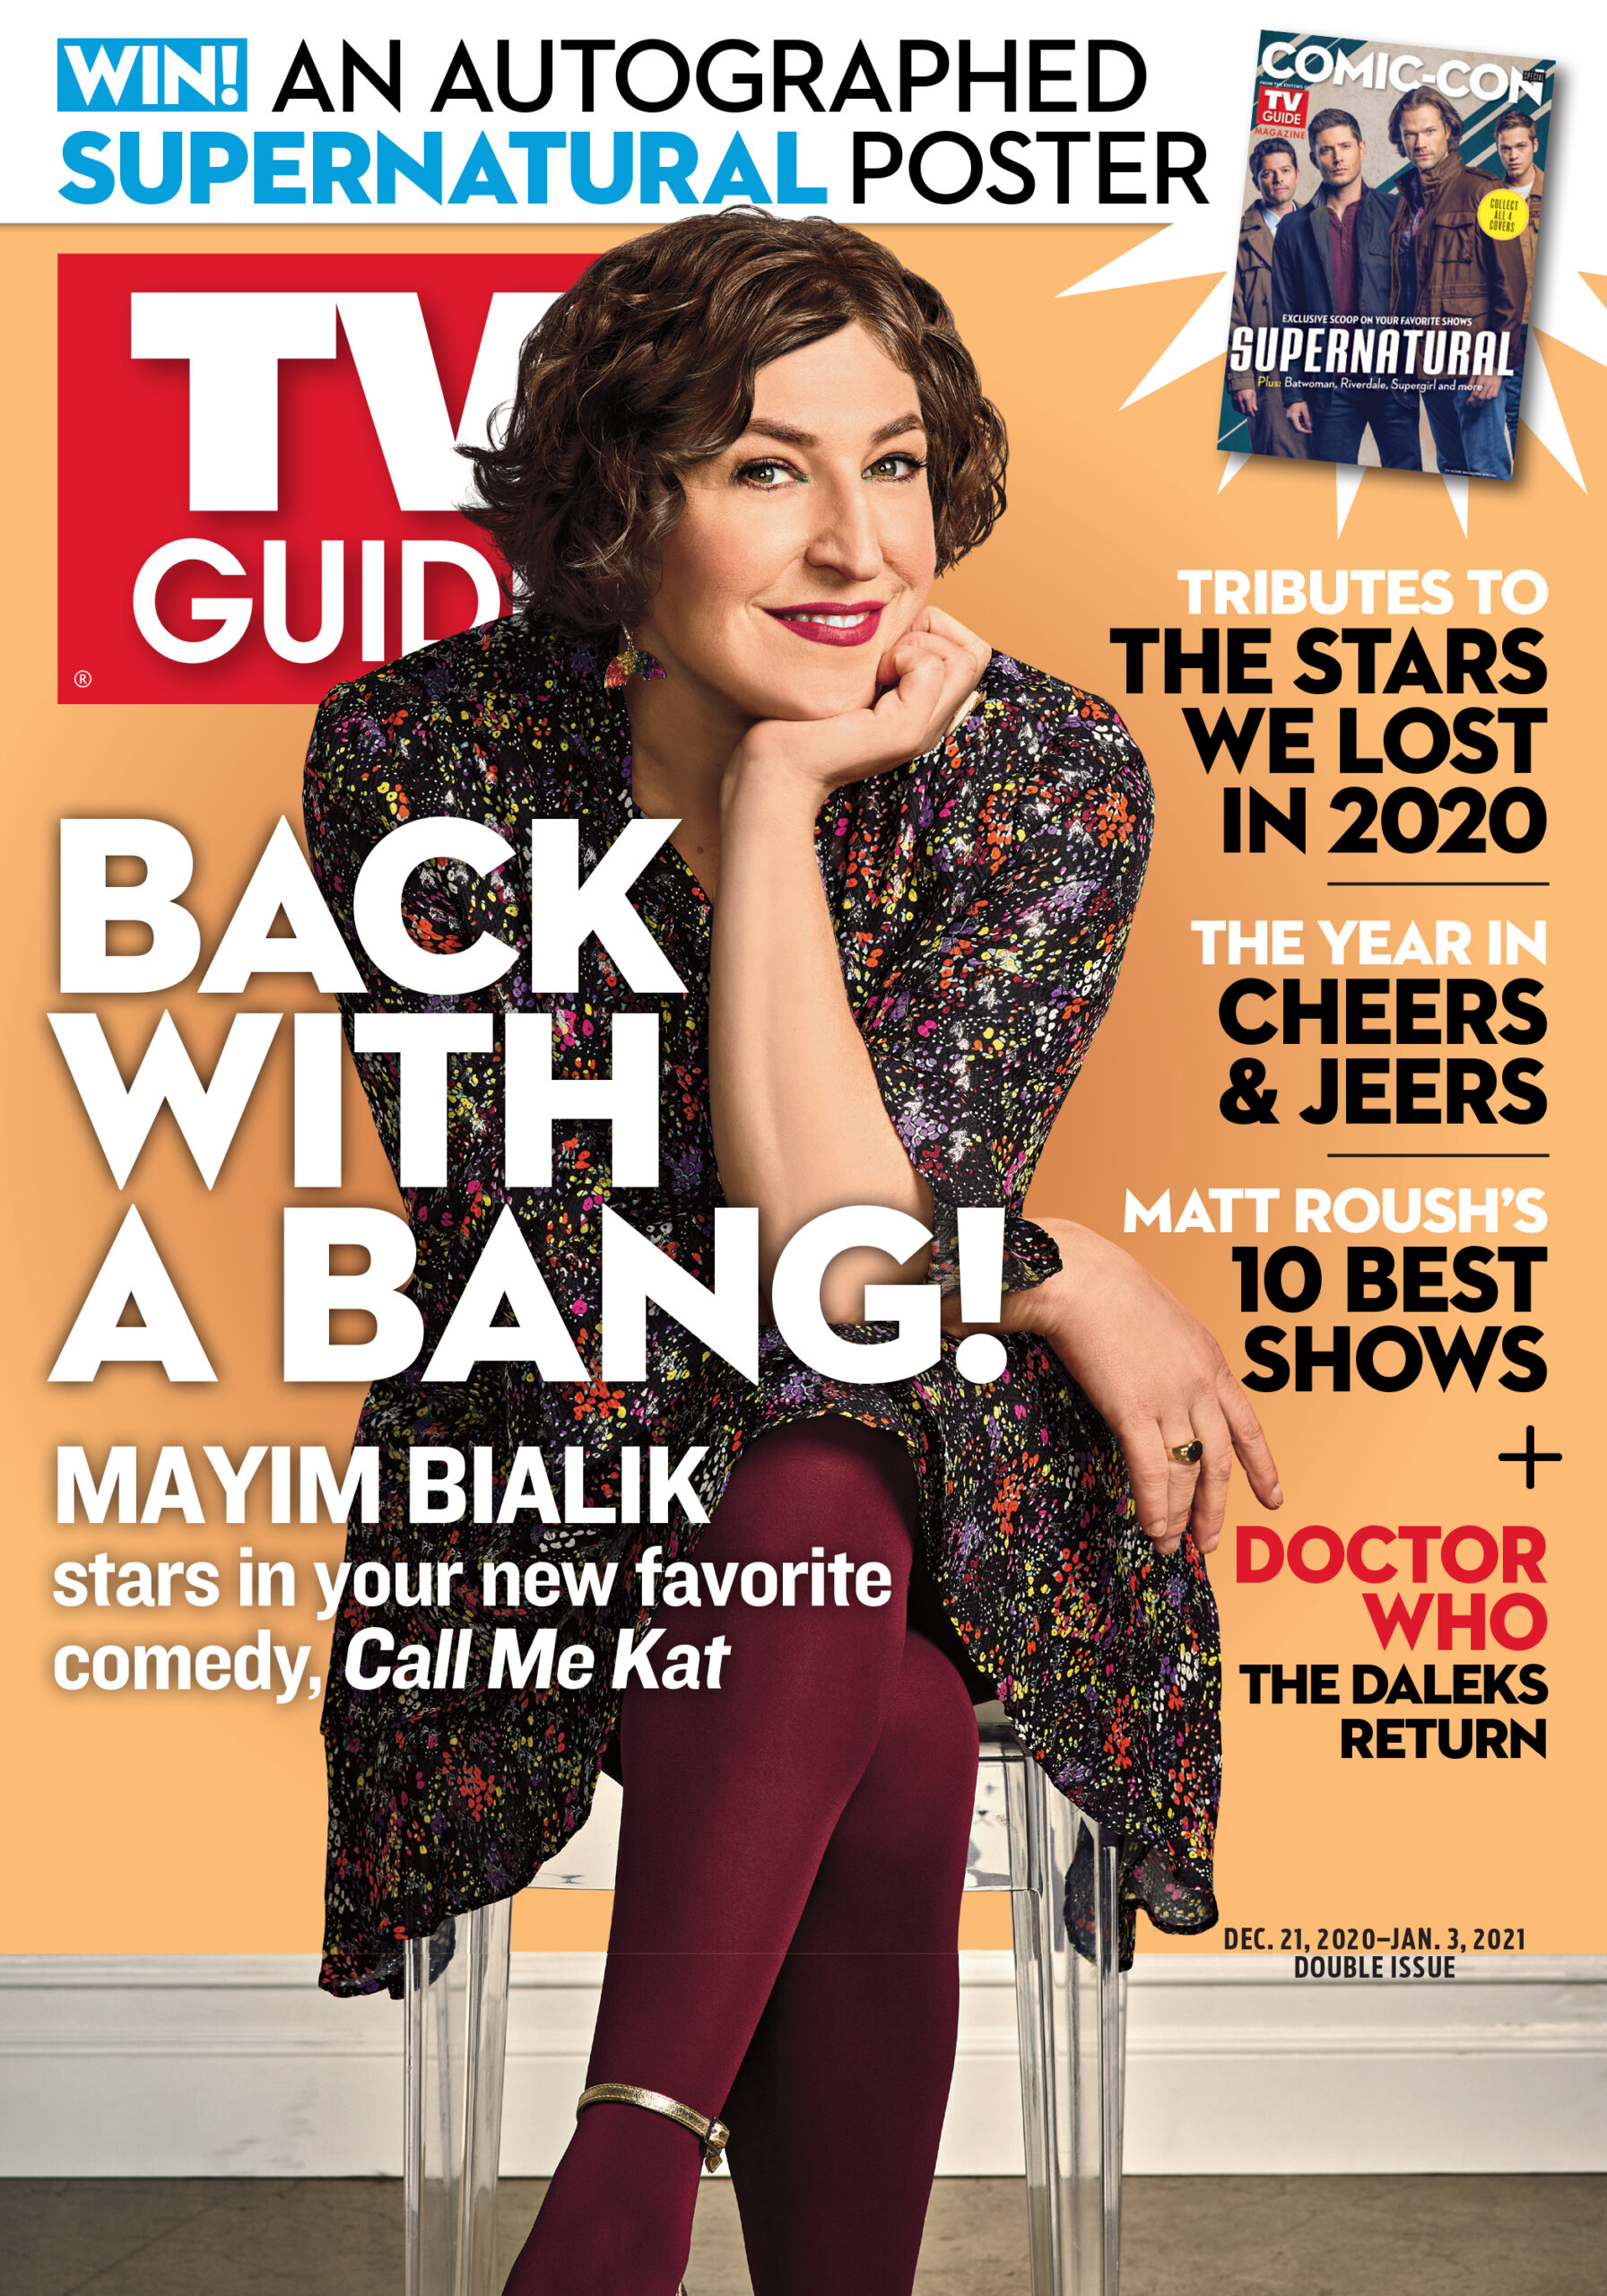 Back With a Mayim Bialik Stars Your New Favorite Comedy, 'Call Me Kat' | The official site of TV Guide Magazine